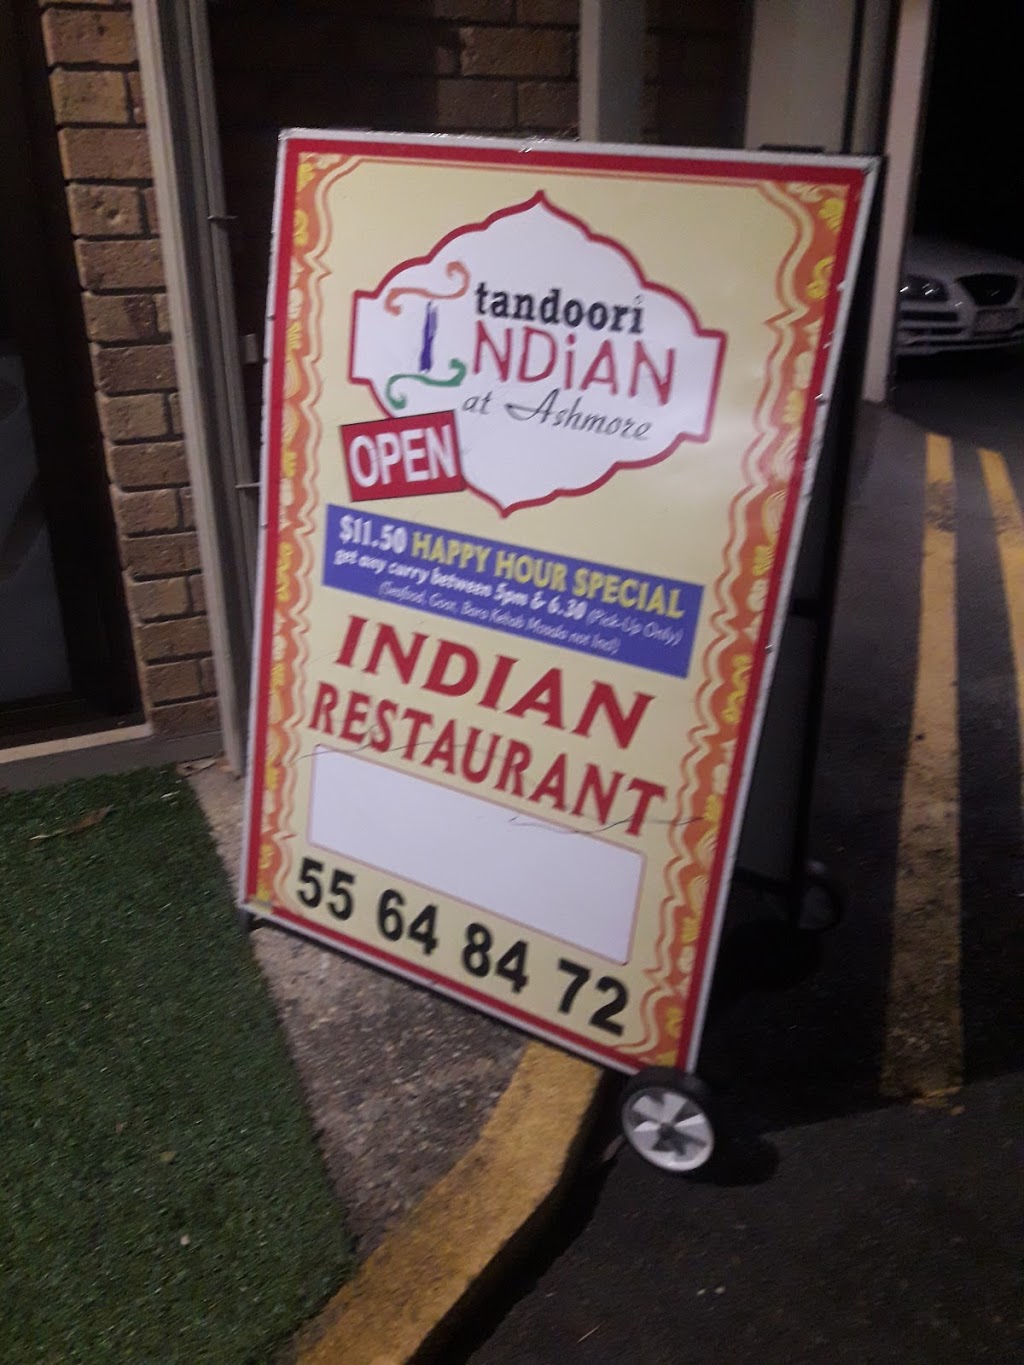 Tandoori Indian At Ashmore | meal delivery | 149A Cotlew St, Ashmore QLD 4214, Australia | 0755648472 OR +61 7 5564 8472